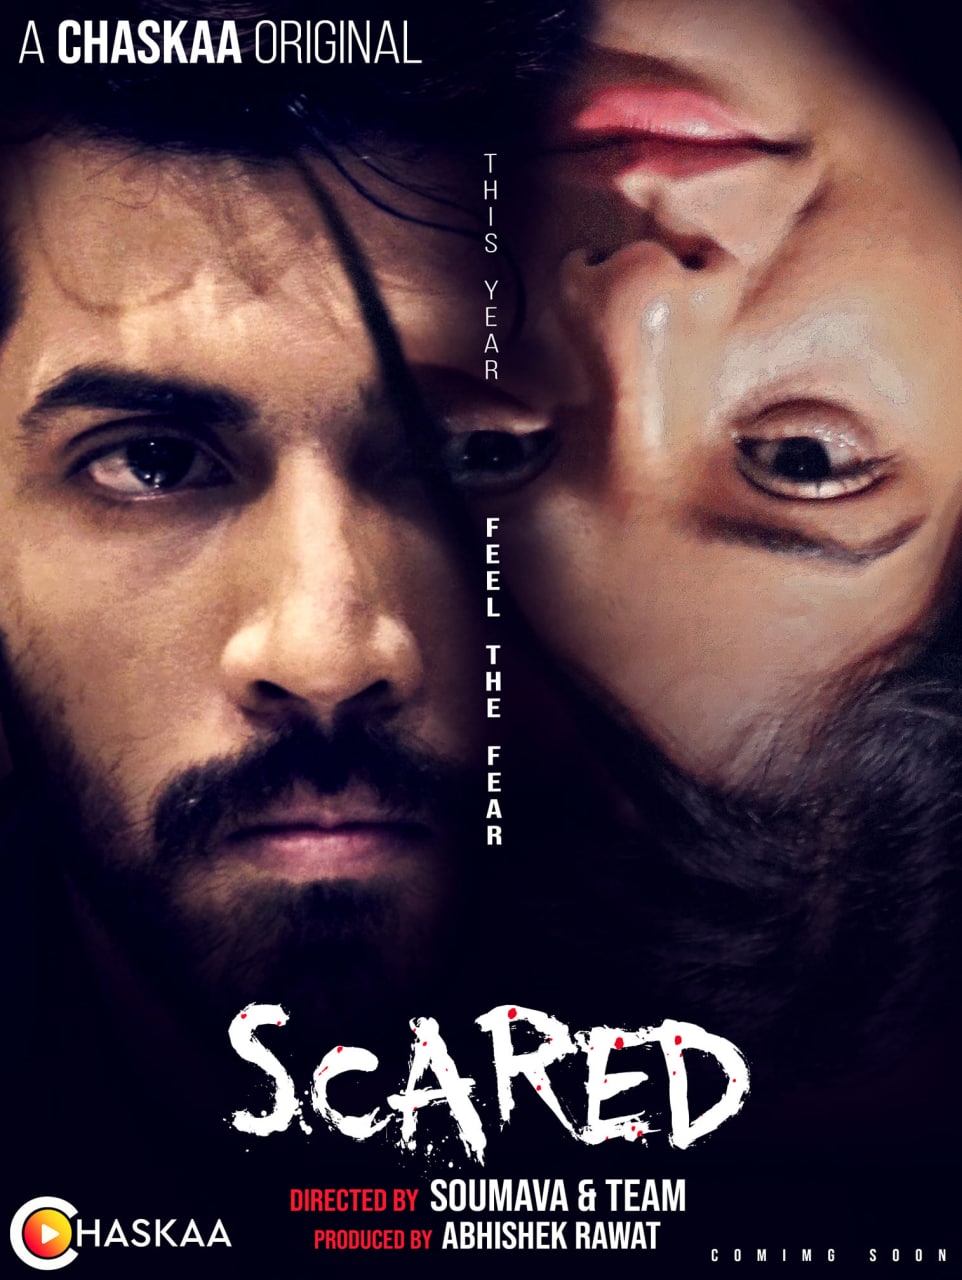 You are currently viewing Scared 2021 oChaskaa Originals Hindi Hot Short Film 720p HDRip 150MB Download & Watch Online